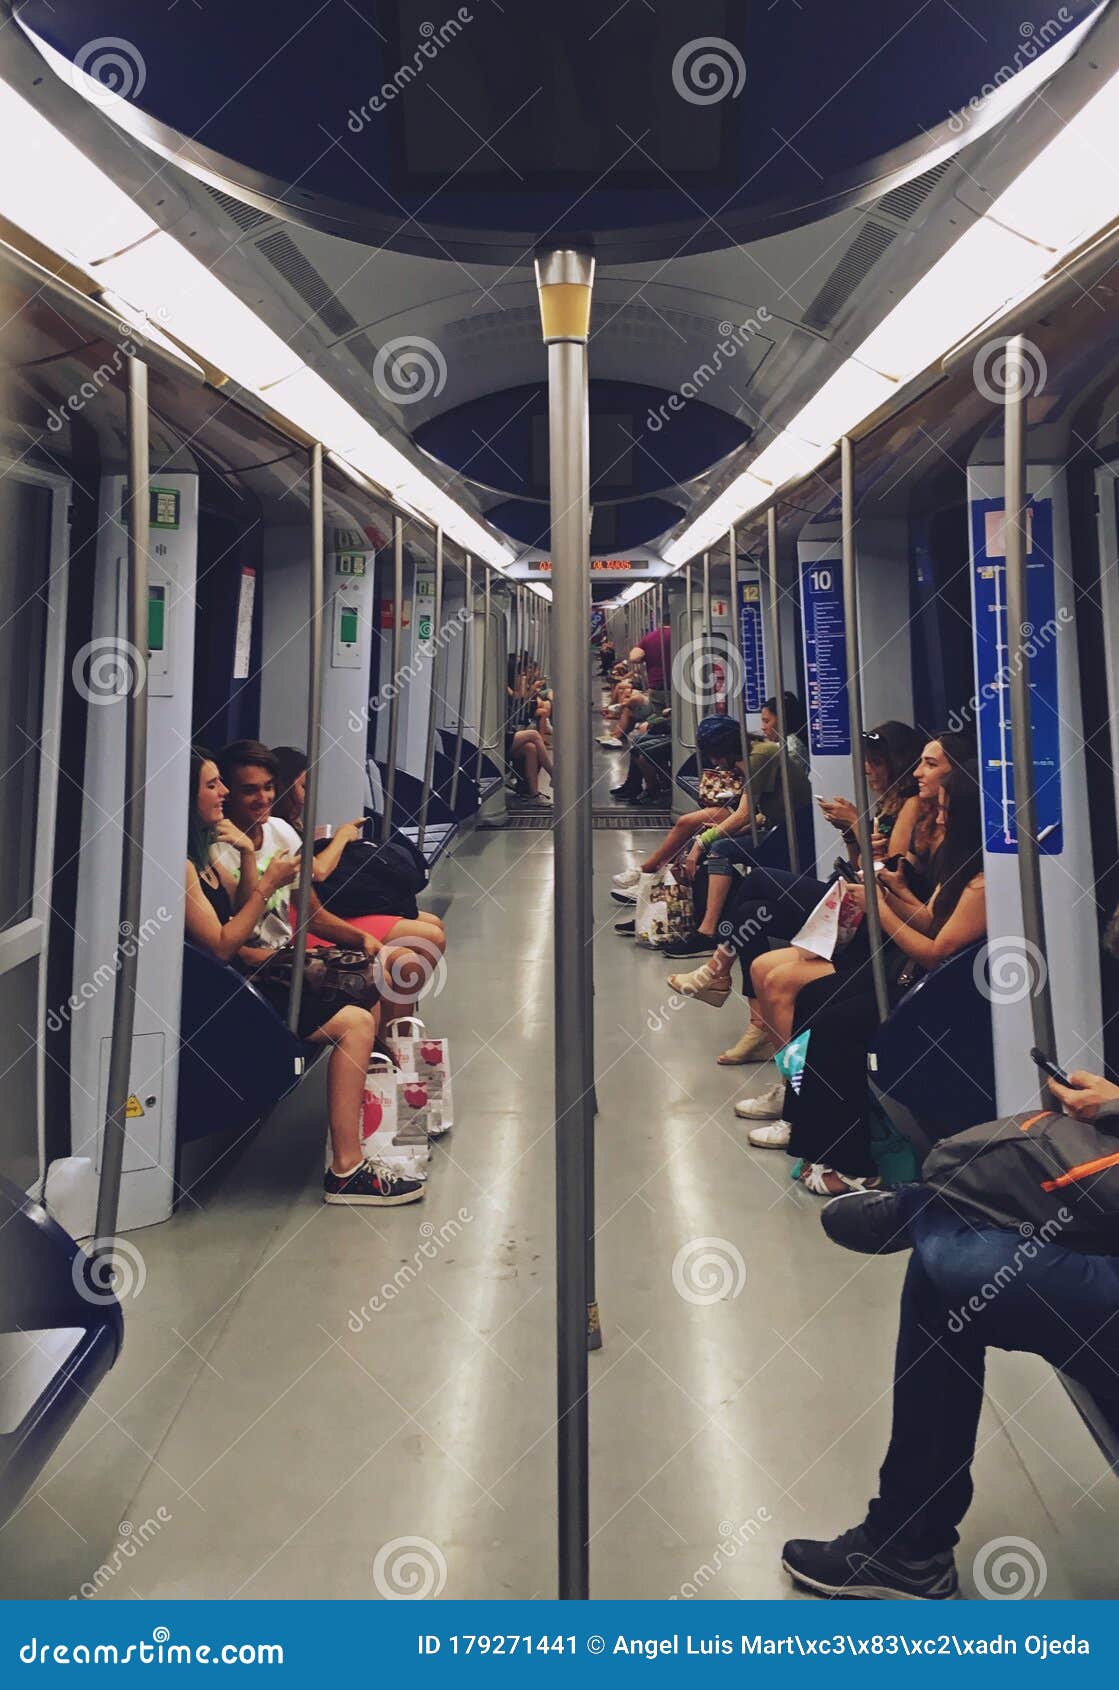 Facilities and Passengers of the Madrid Editorial Photo - Image of railway: 179271441